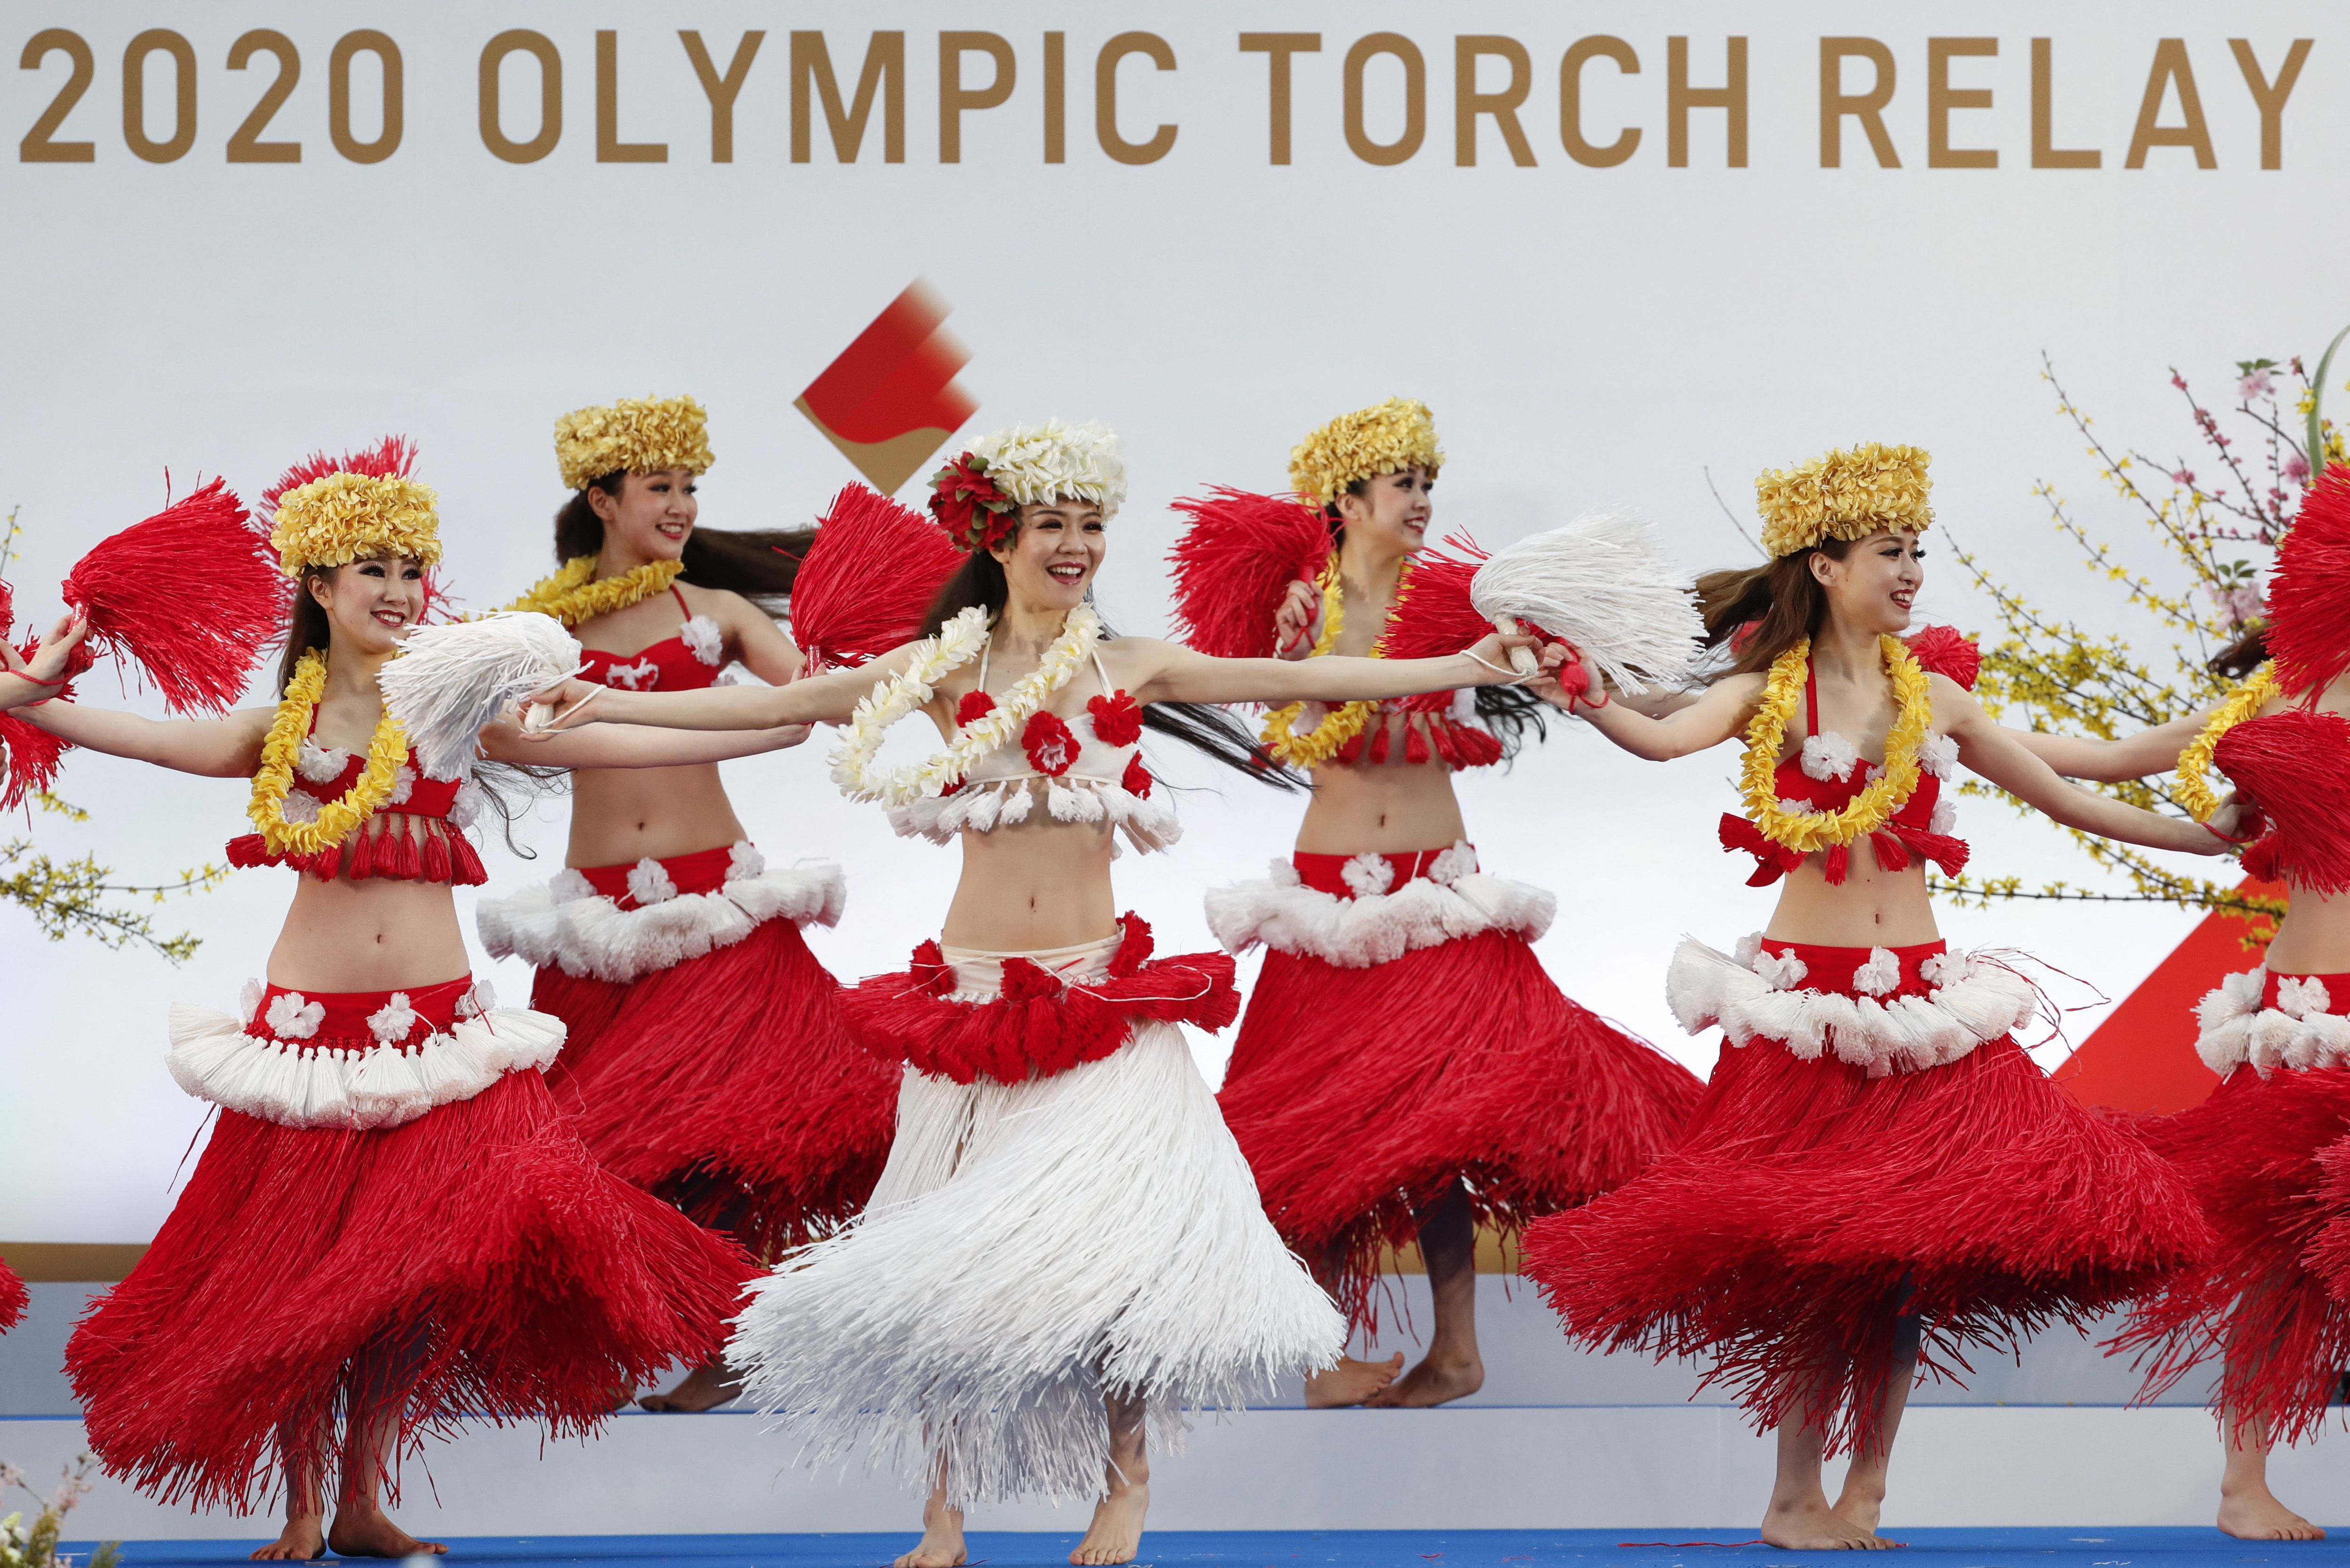 Members of the Spa Resort Hawaiians Dancing Team "Hula Girls" perform during an opening ceremony on the first day of the Tokyo 2020 Olympic torch relay in Naraha, Fukushima prefecture on March 25